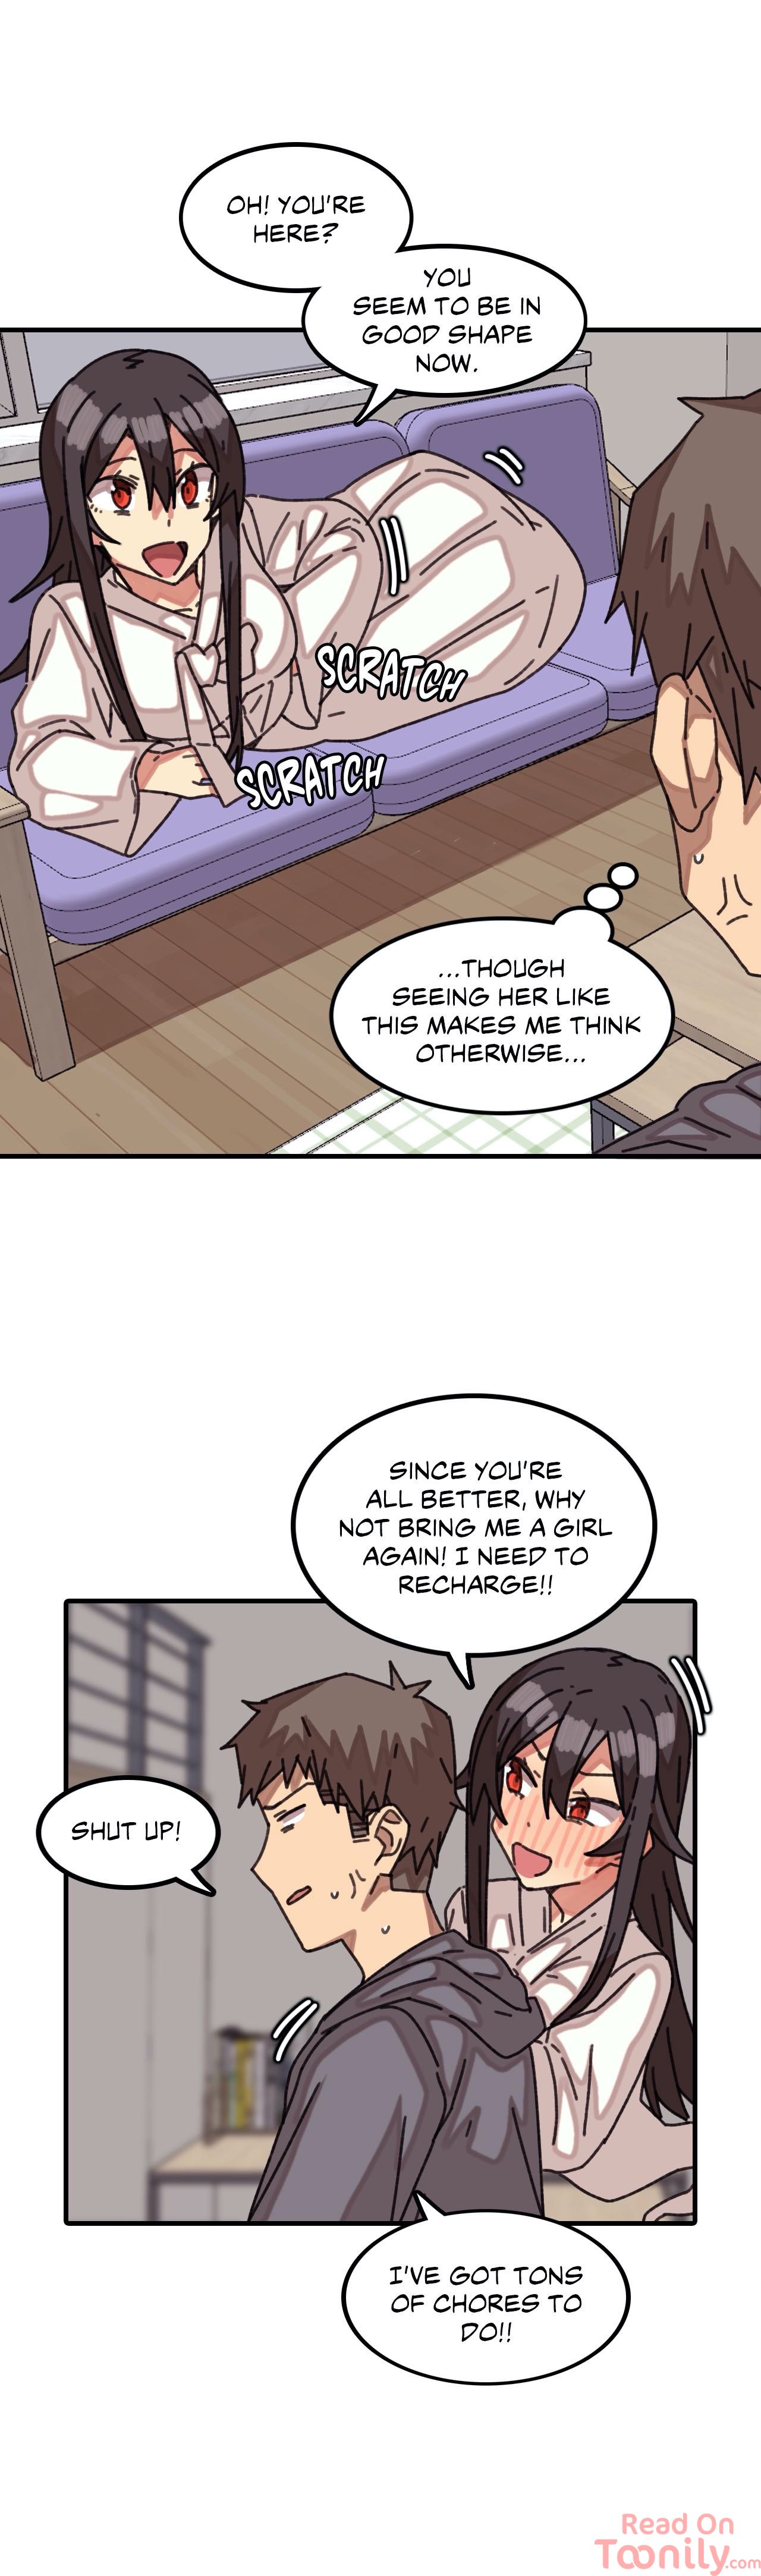 The Girl That Lingers in the Wall - Chapter 22 Page 18